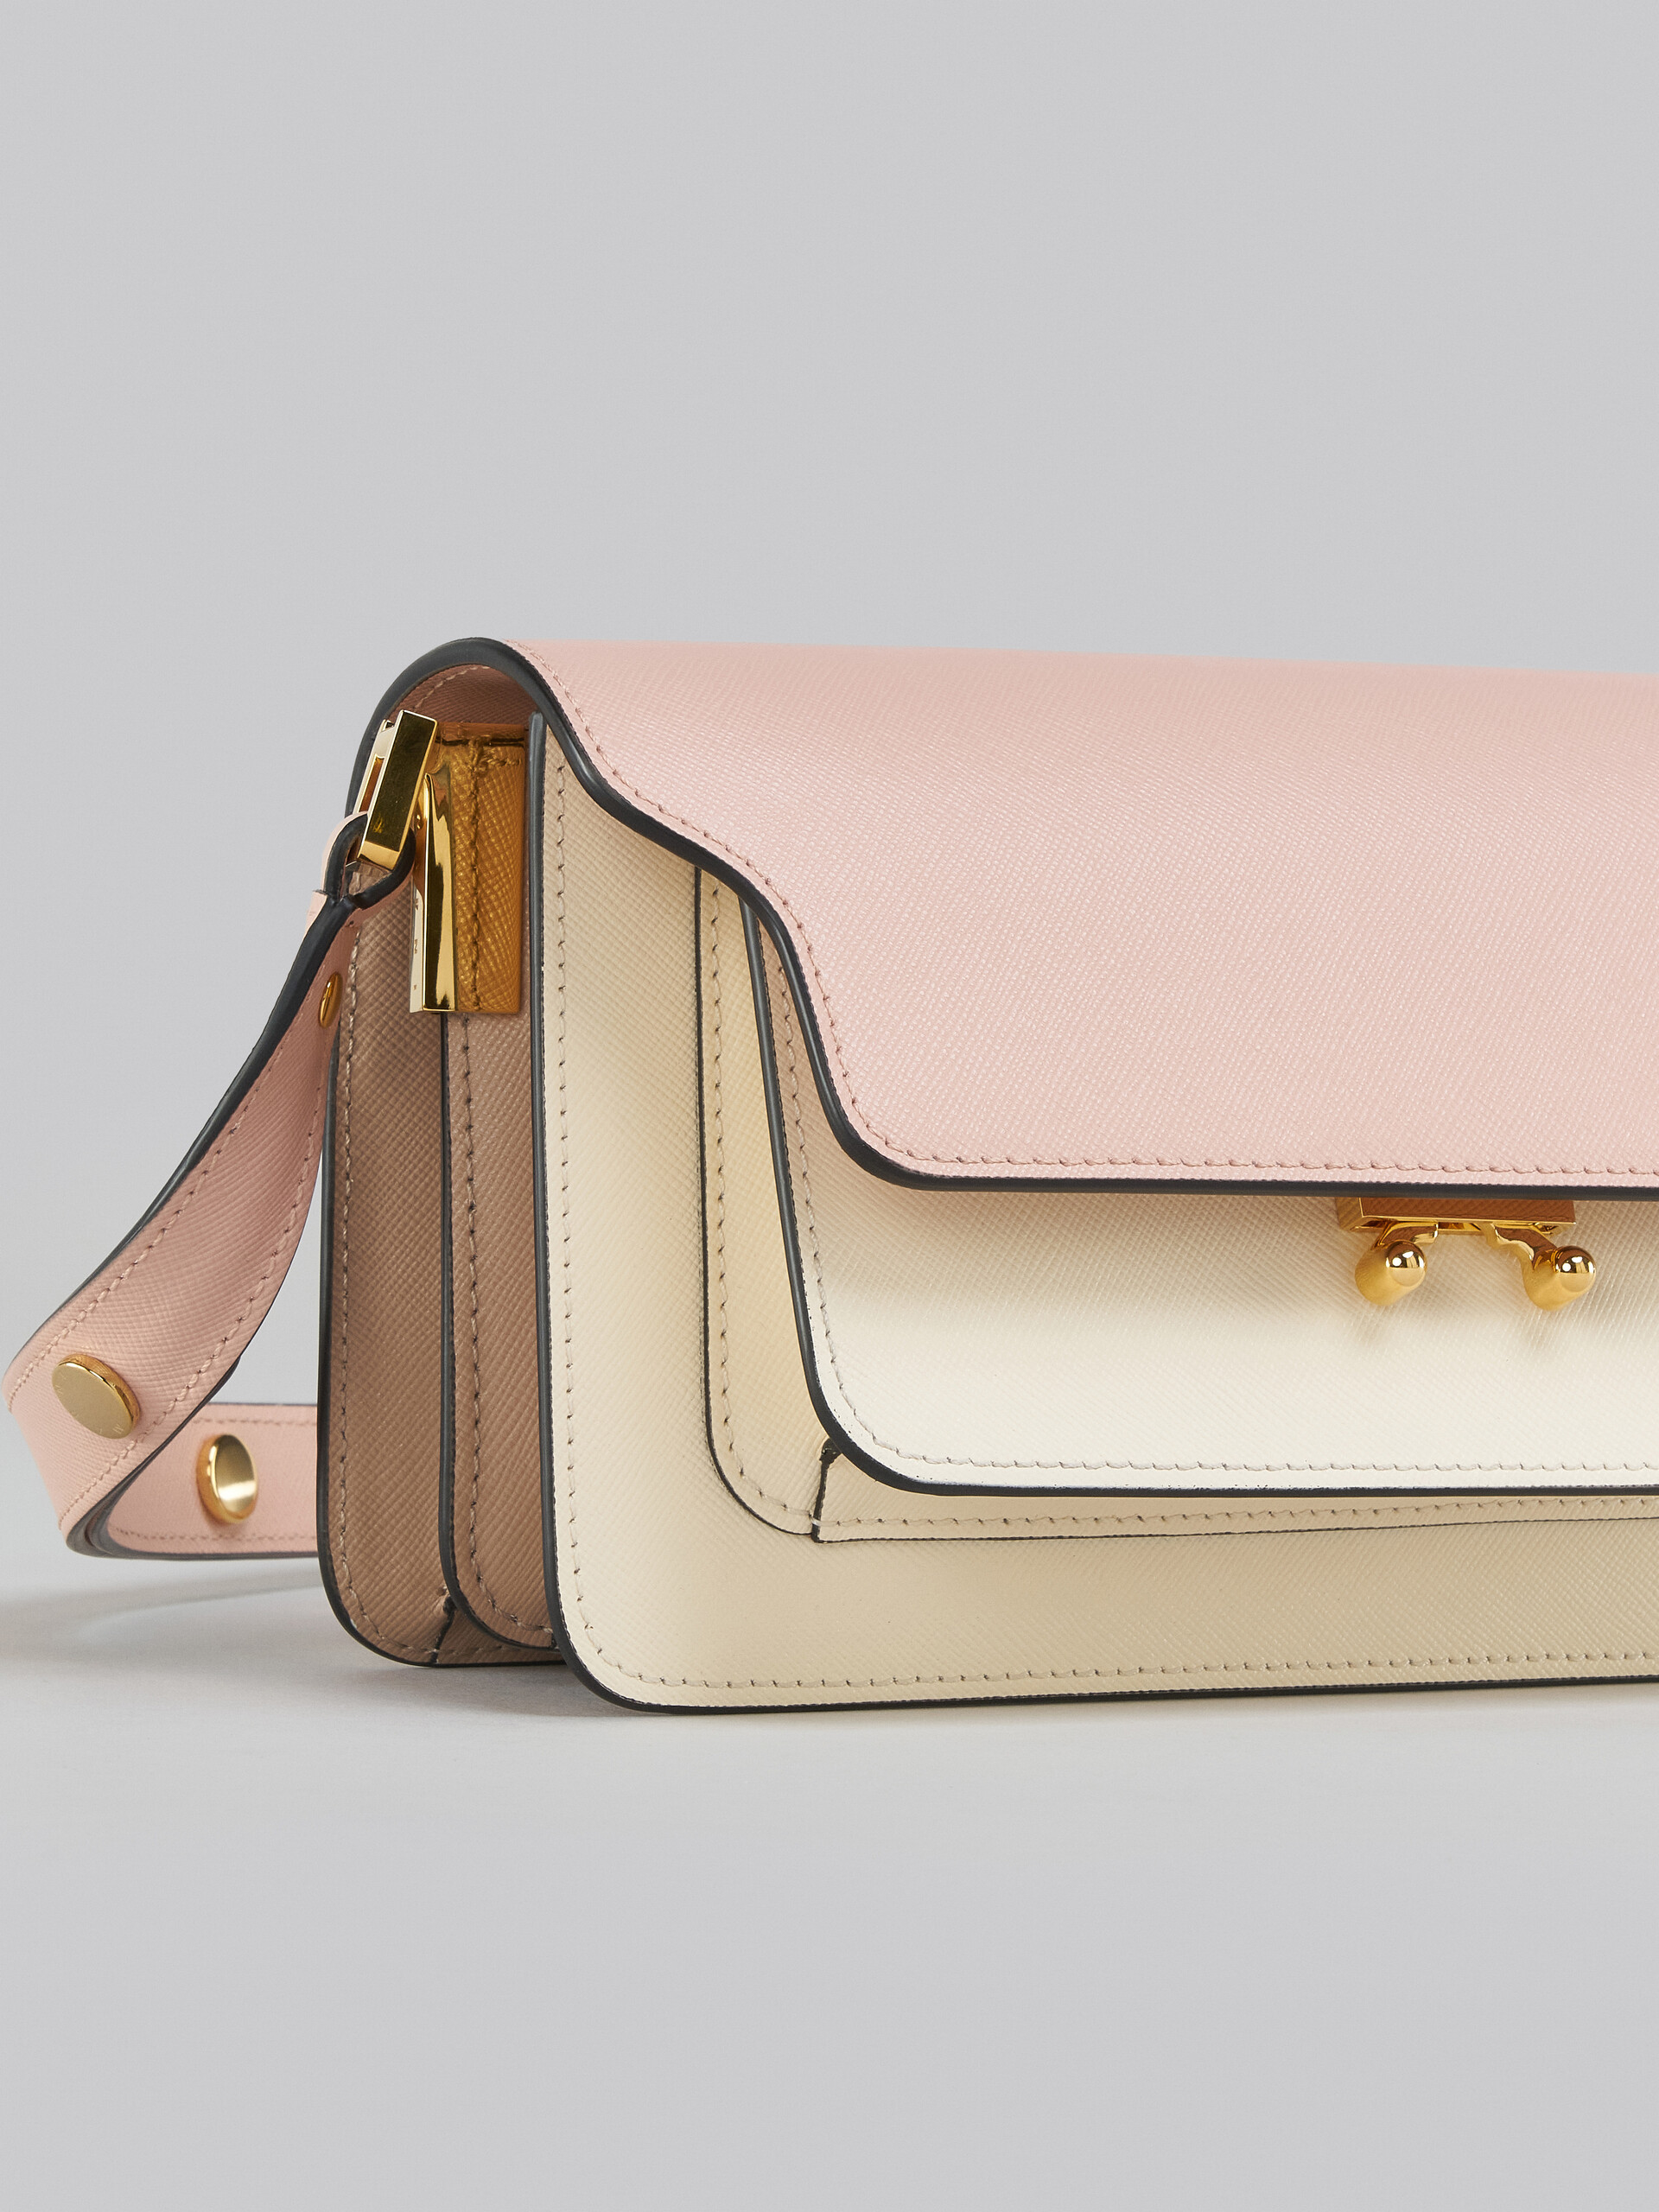 Trunk Bag E/W in pink and white saffiano leather - Shoulder Bags - Image 5